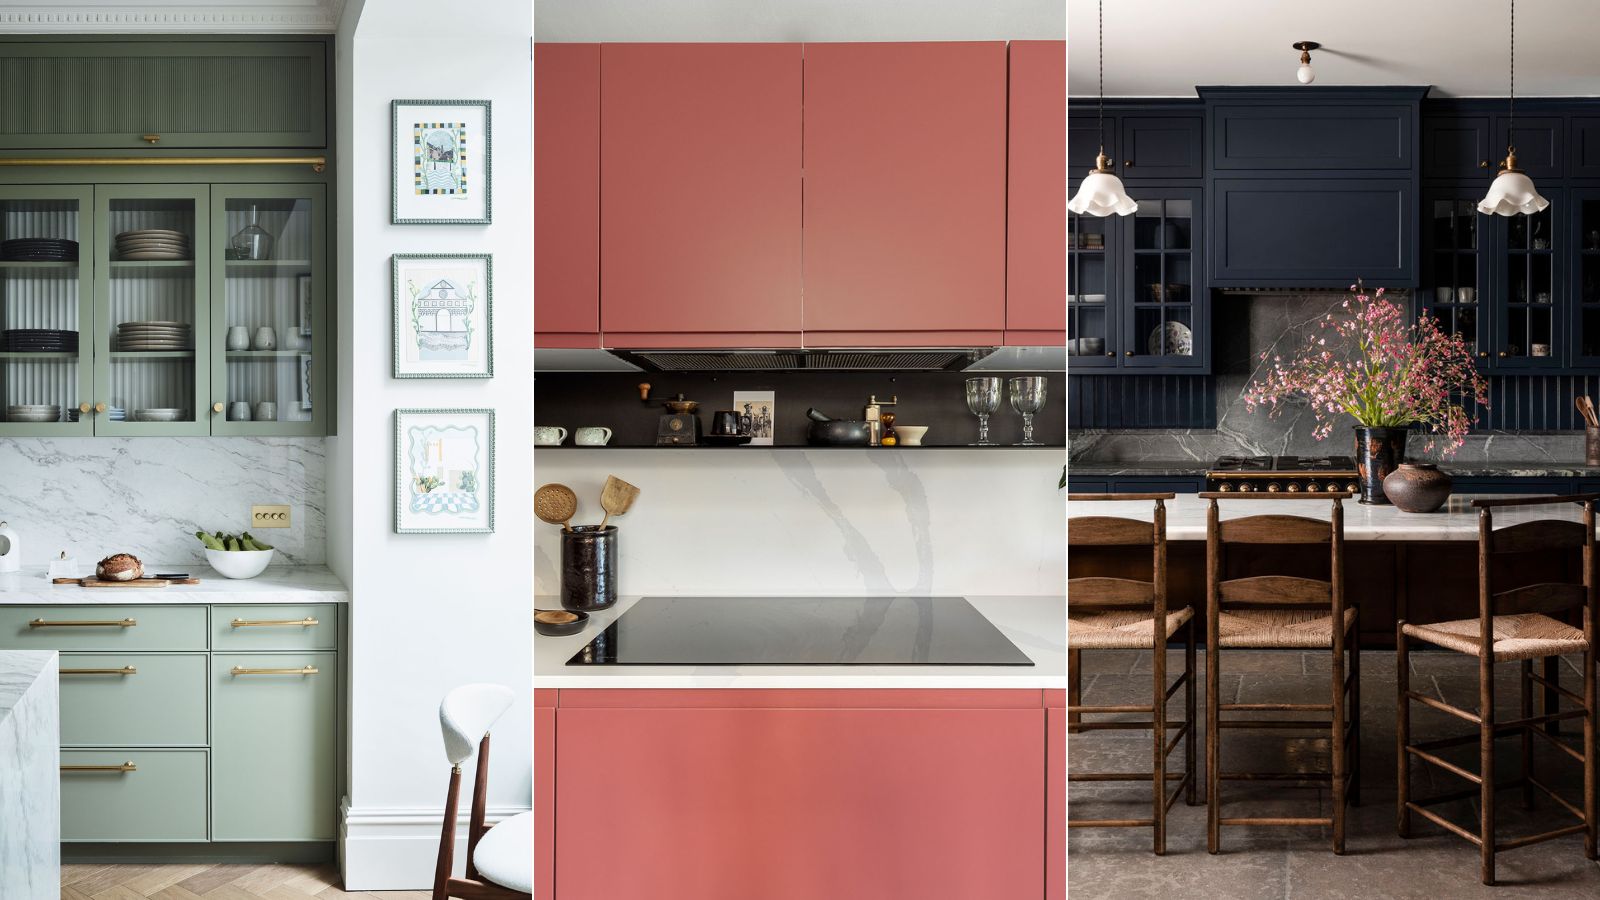 Terracotta kitchen ideas: from burnt orange hues to warm pastels